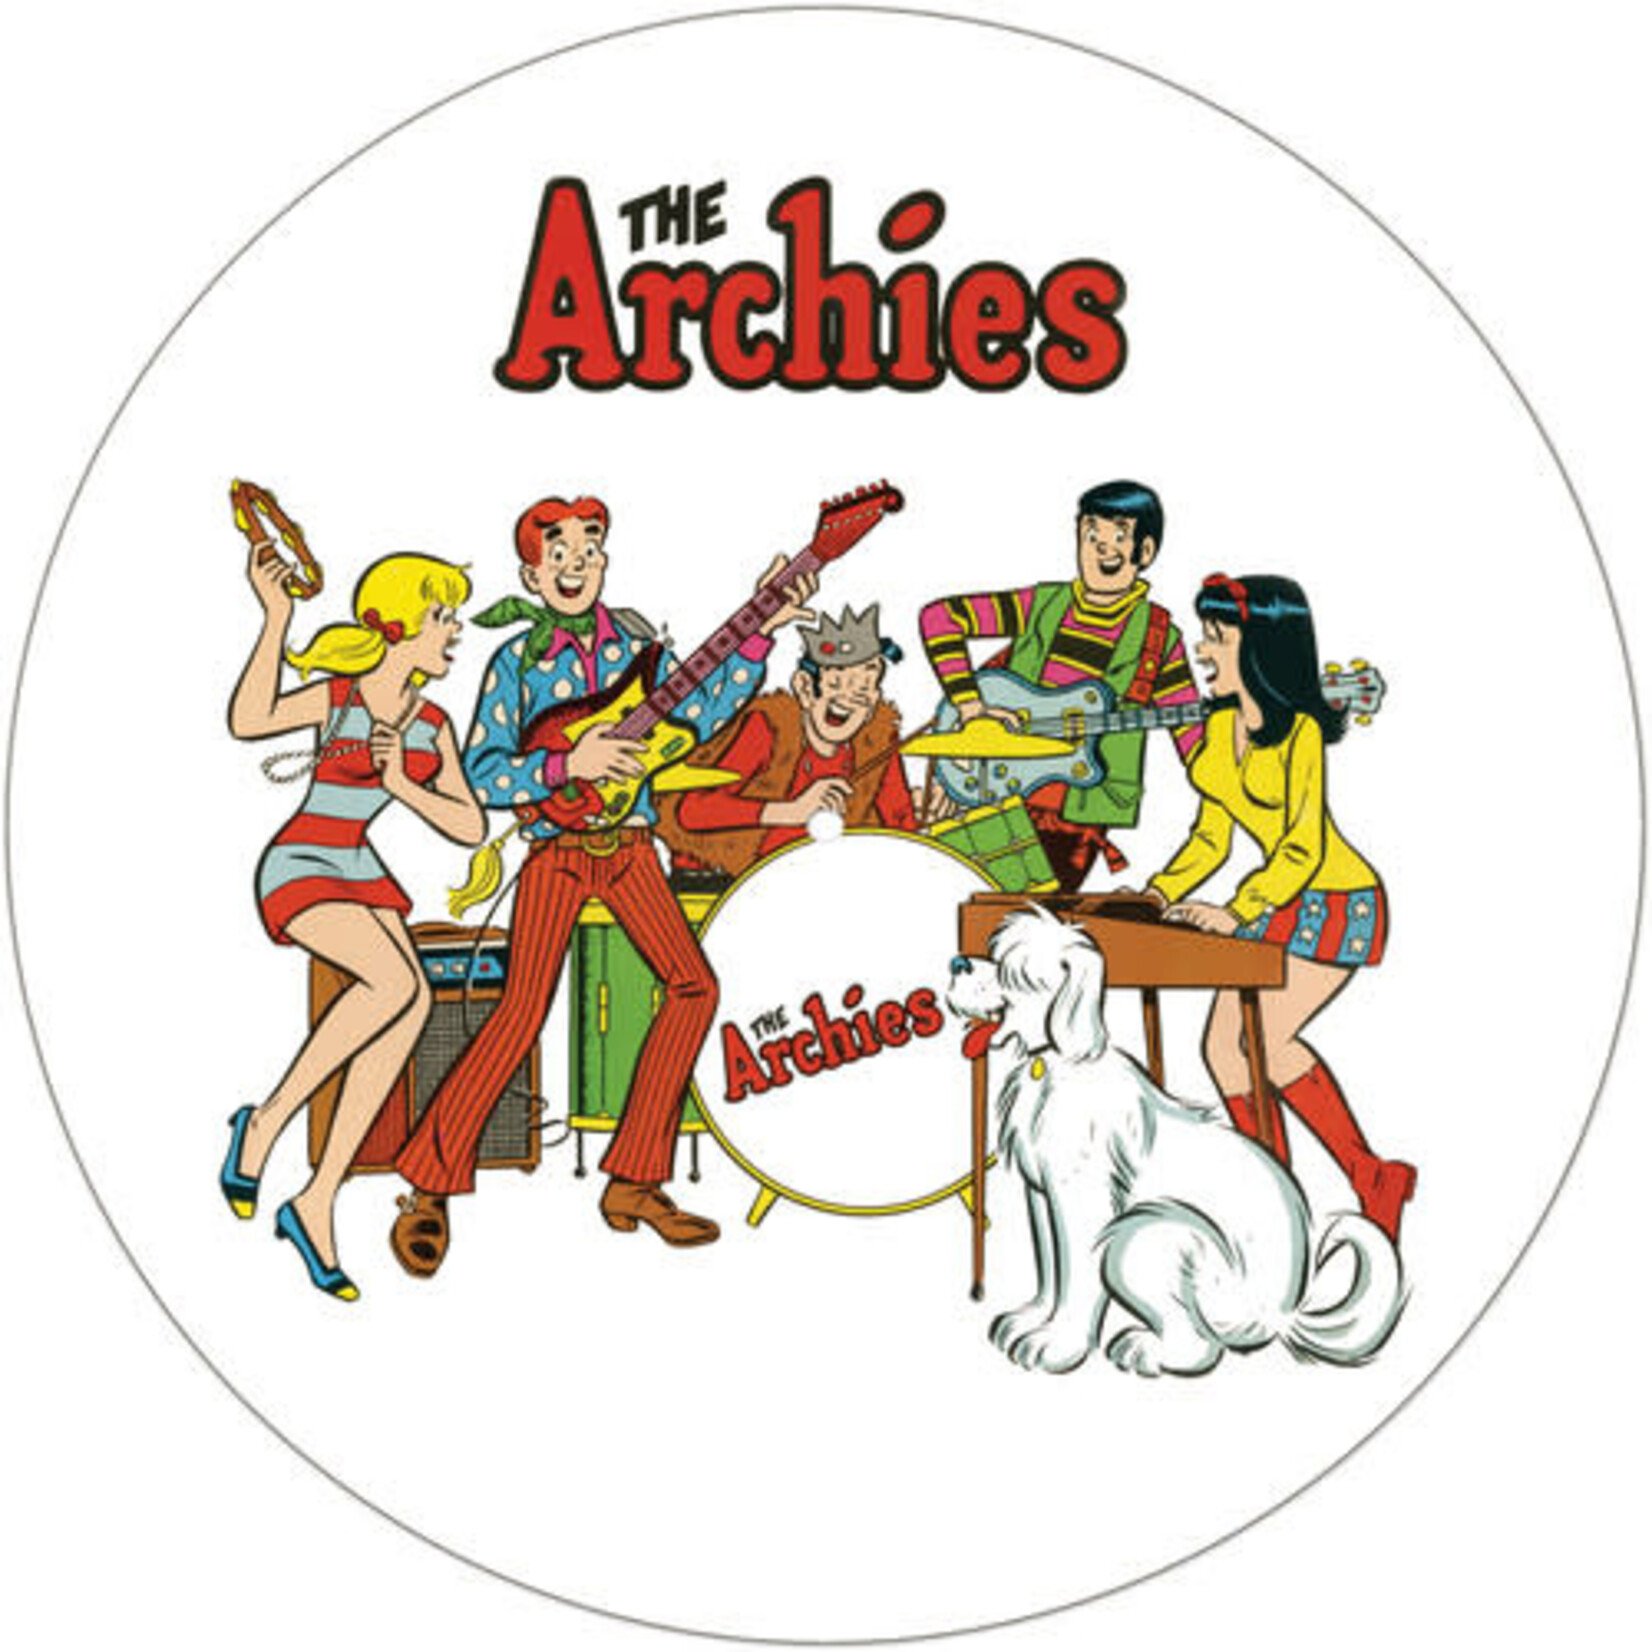 [New] Archies - The Archies (picture disc)